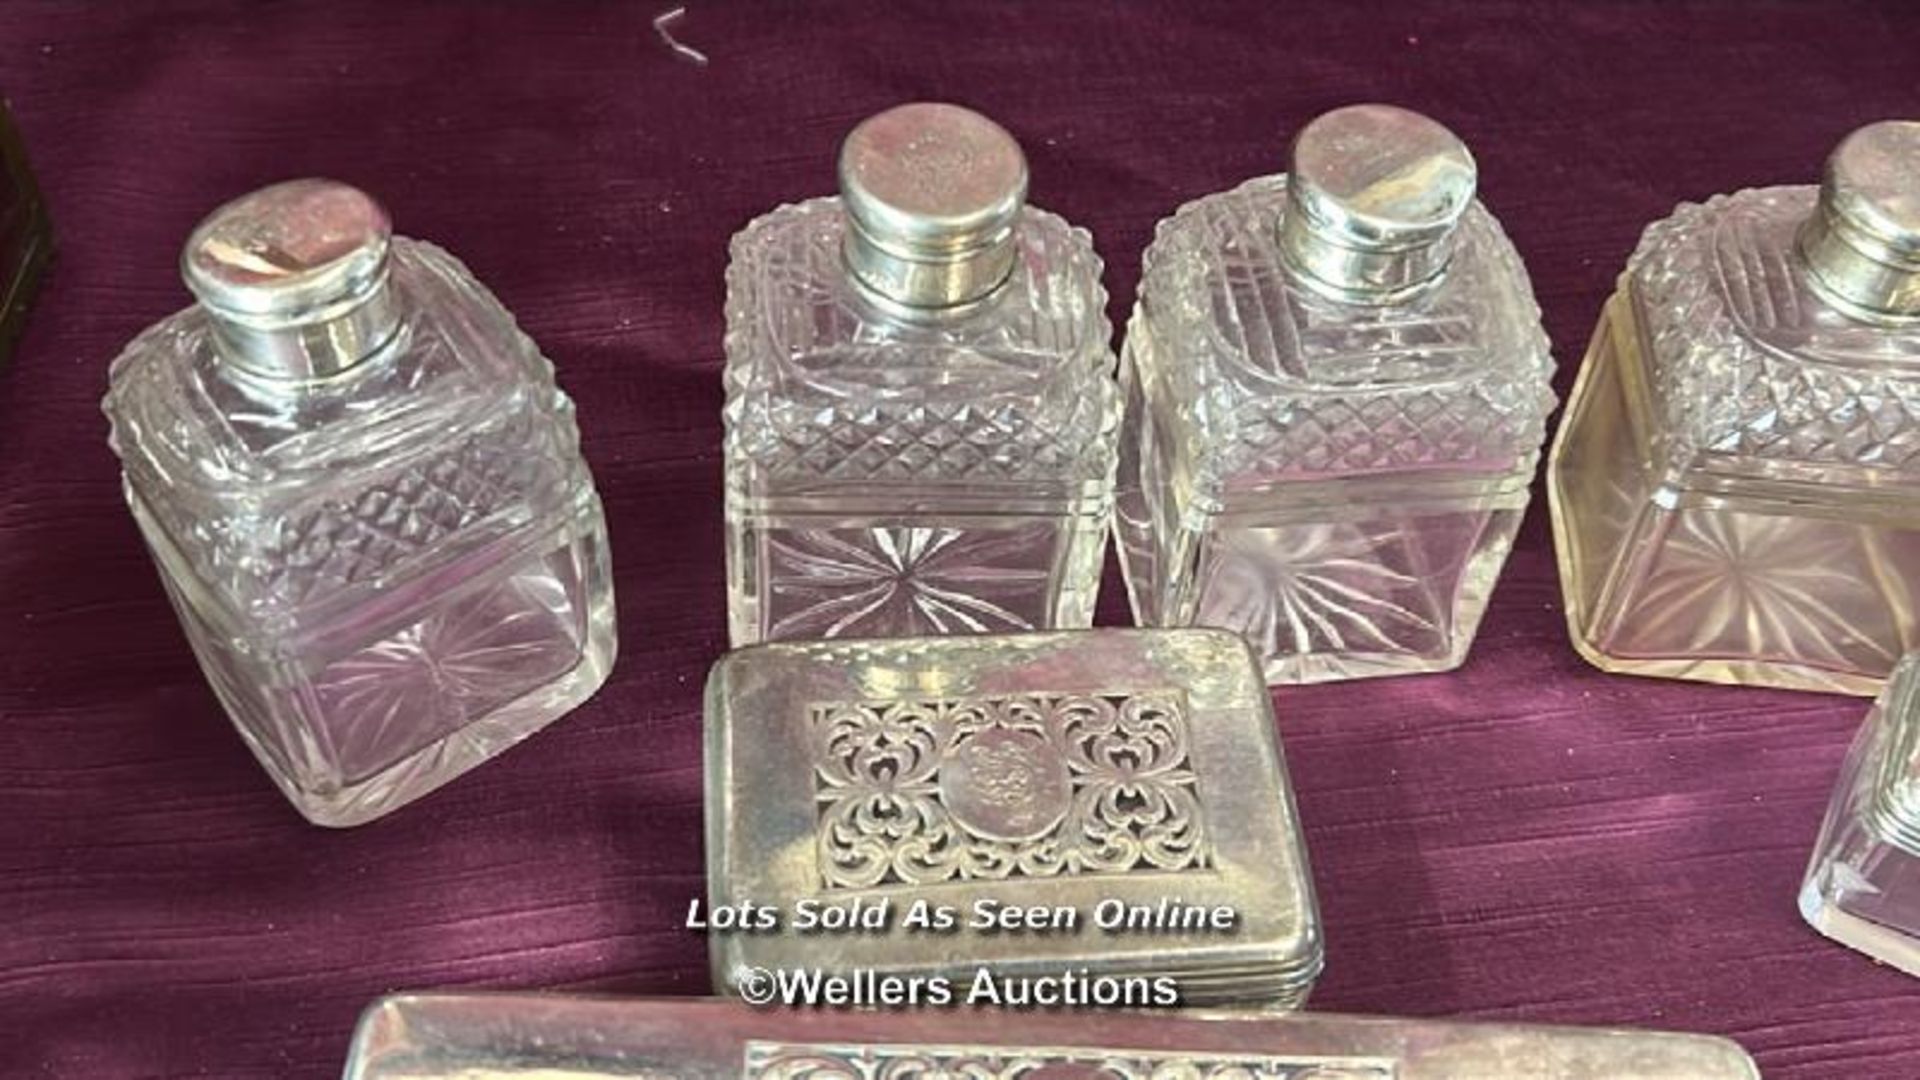 EARLY 19TH CENTURY GENTLEMAN'S VANITY BOX CONTAINING STERLING SILVER AND GLASS CONTAINERS, WITHOUT - Image 5 of 12